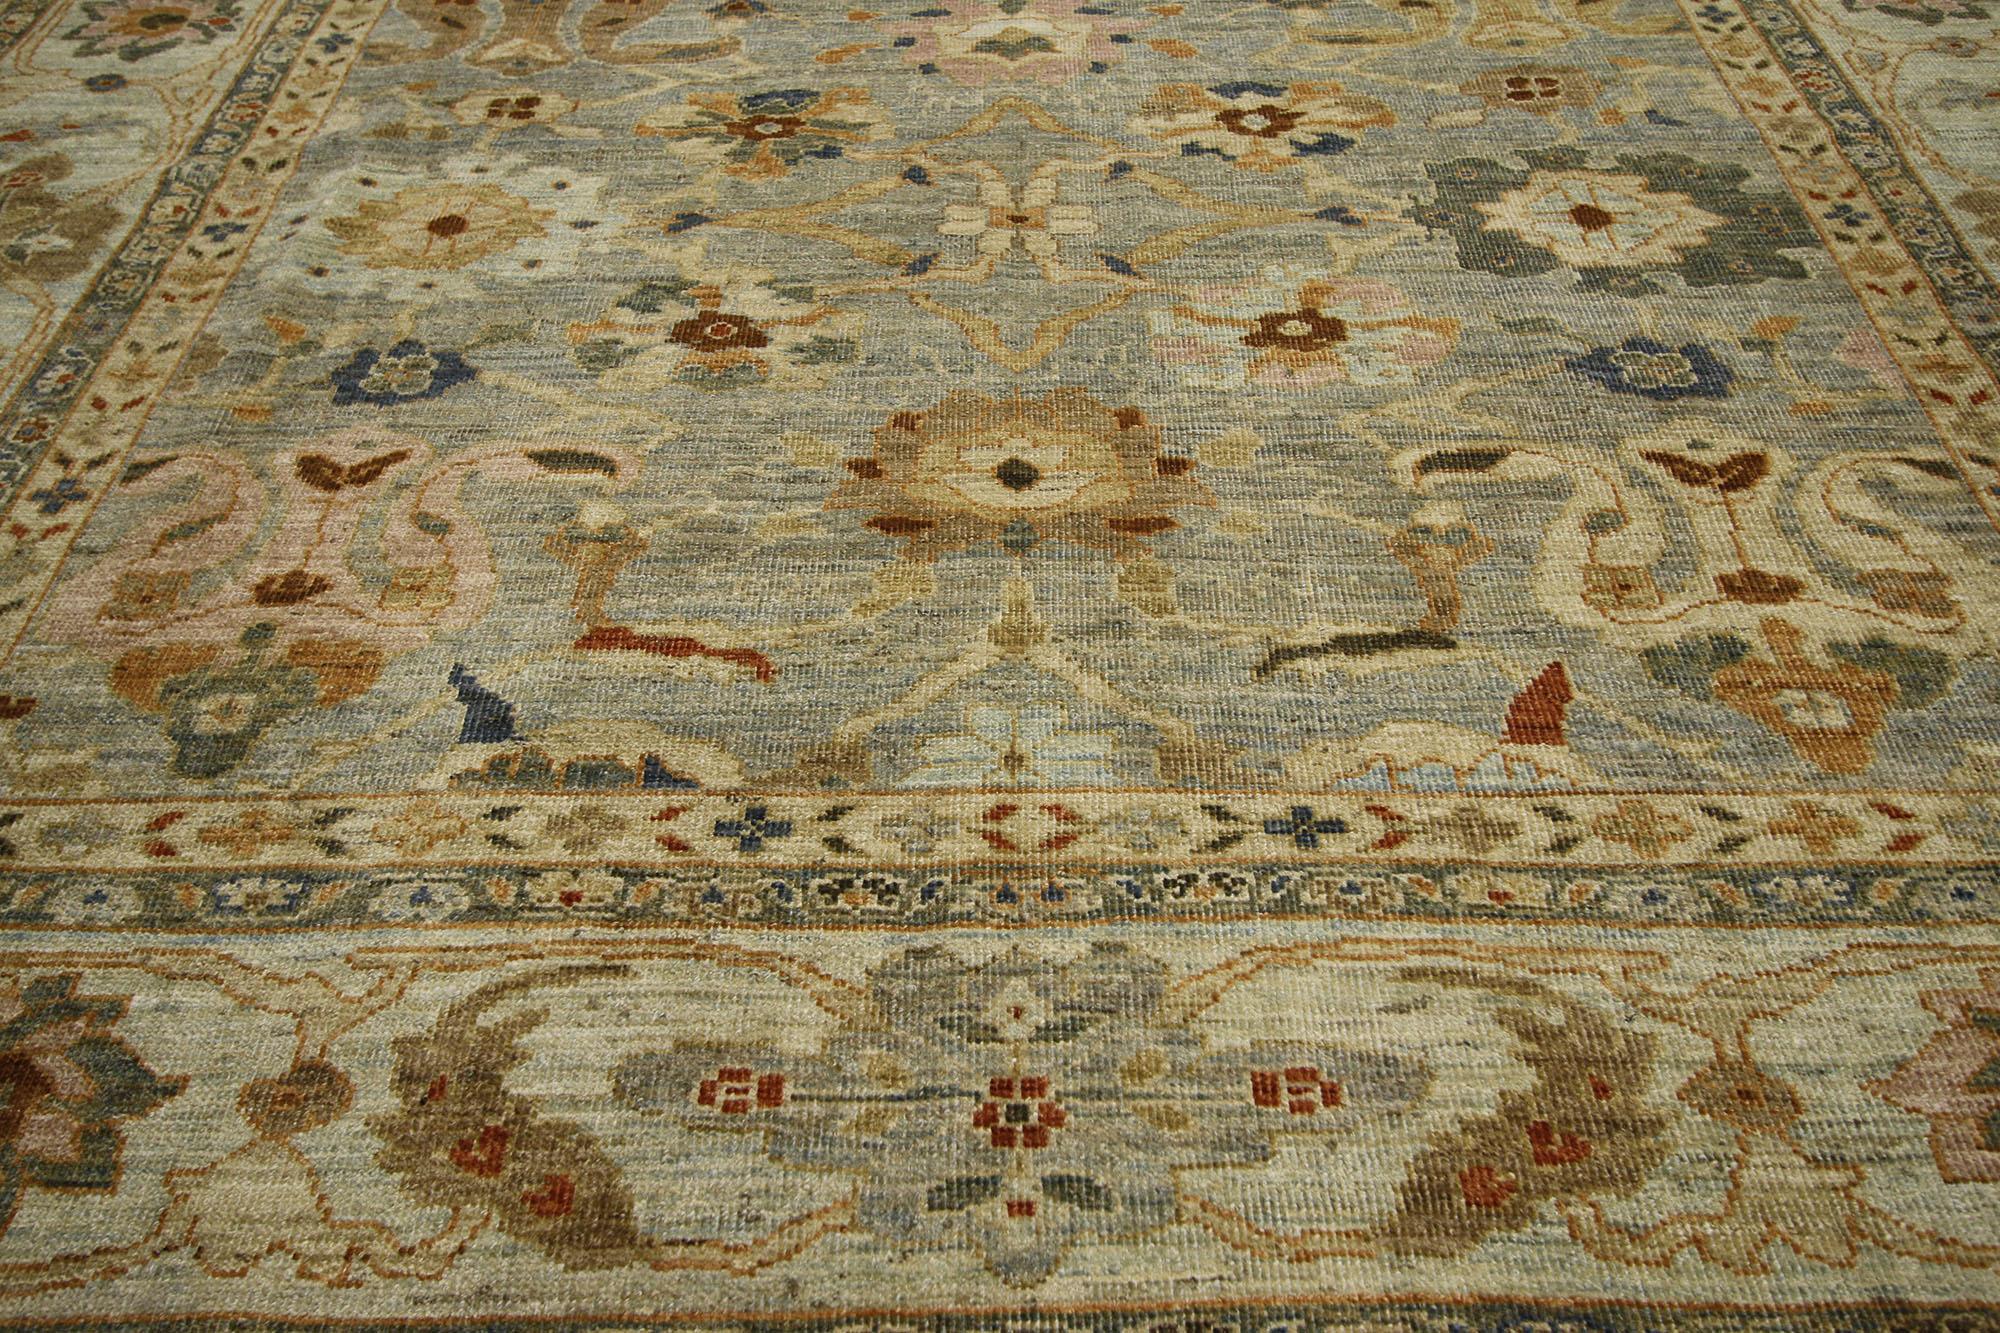 60700, New Contemporary Turkish Oushak Rug with Transitional Beach House Coastal Style. With transitional style and harmonious hues, this modern Turkish Oushak rug keeps the eyes entertained, but it is still calm and soothing. The Turkish Oushak rug